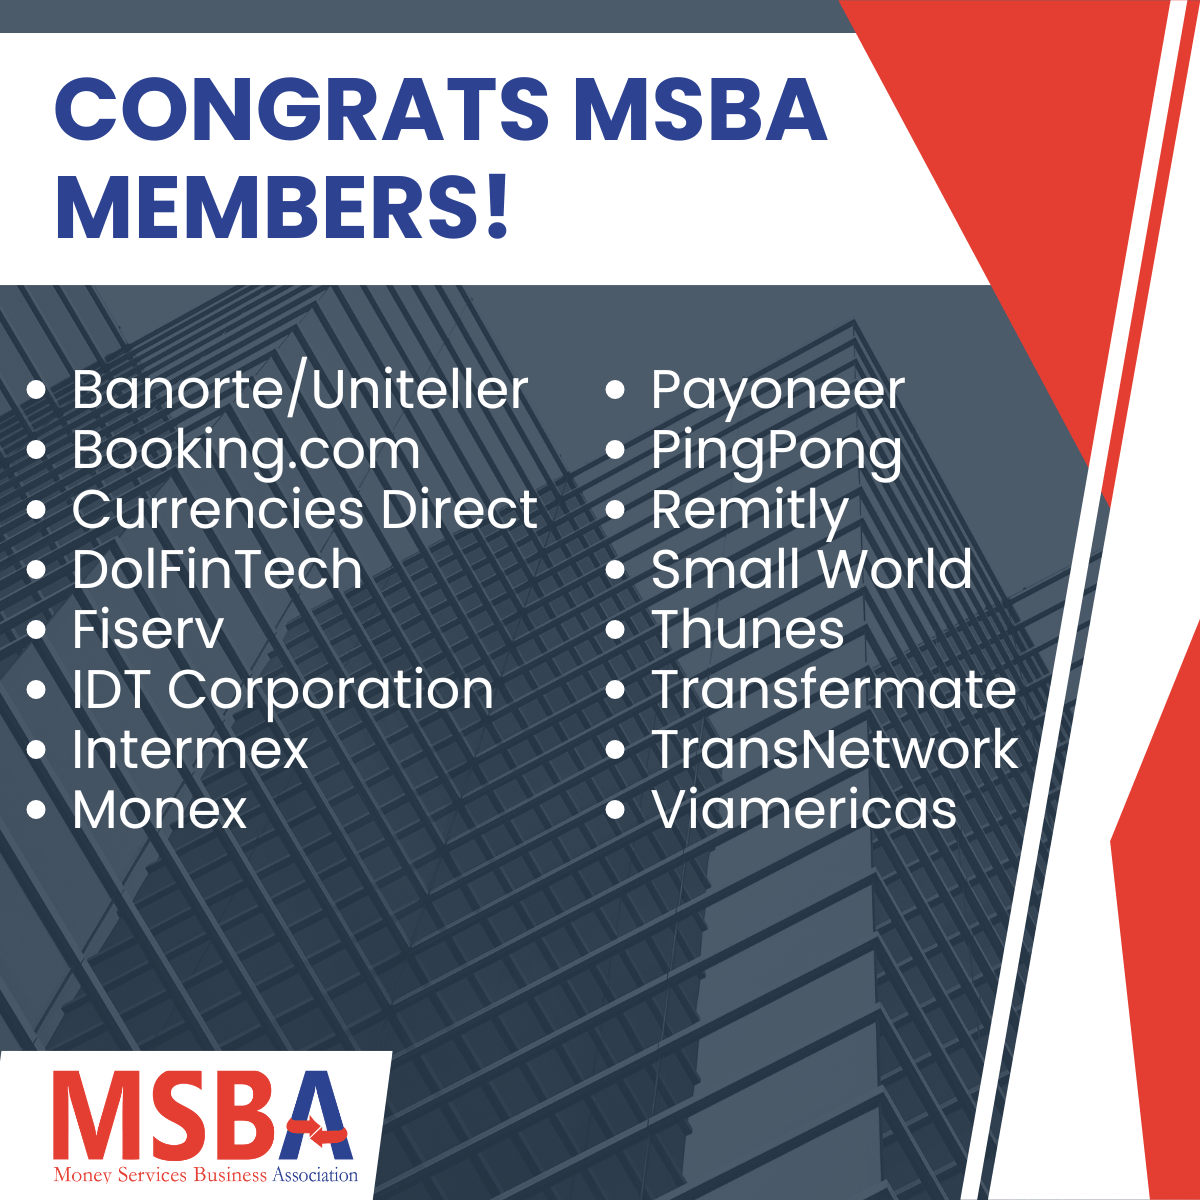 Congratulations to our MSBA Members who made the list!

linkedin.com/feed/update/ur…

#remittances #crossborderpayments #fintech